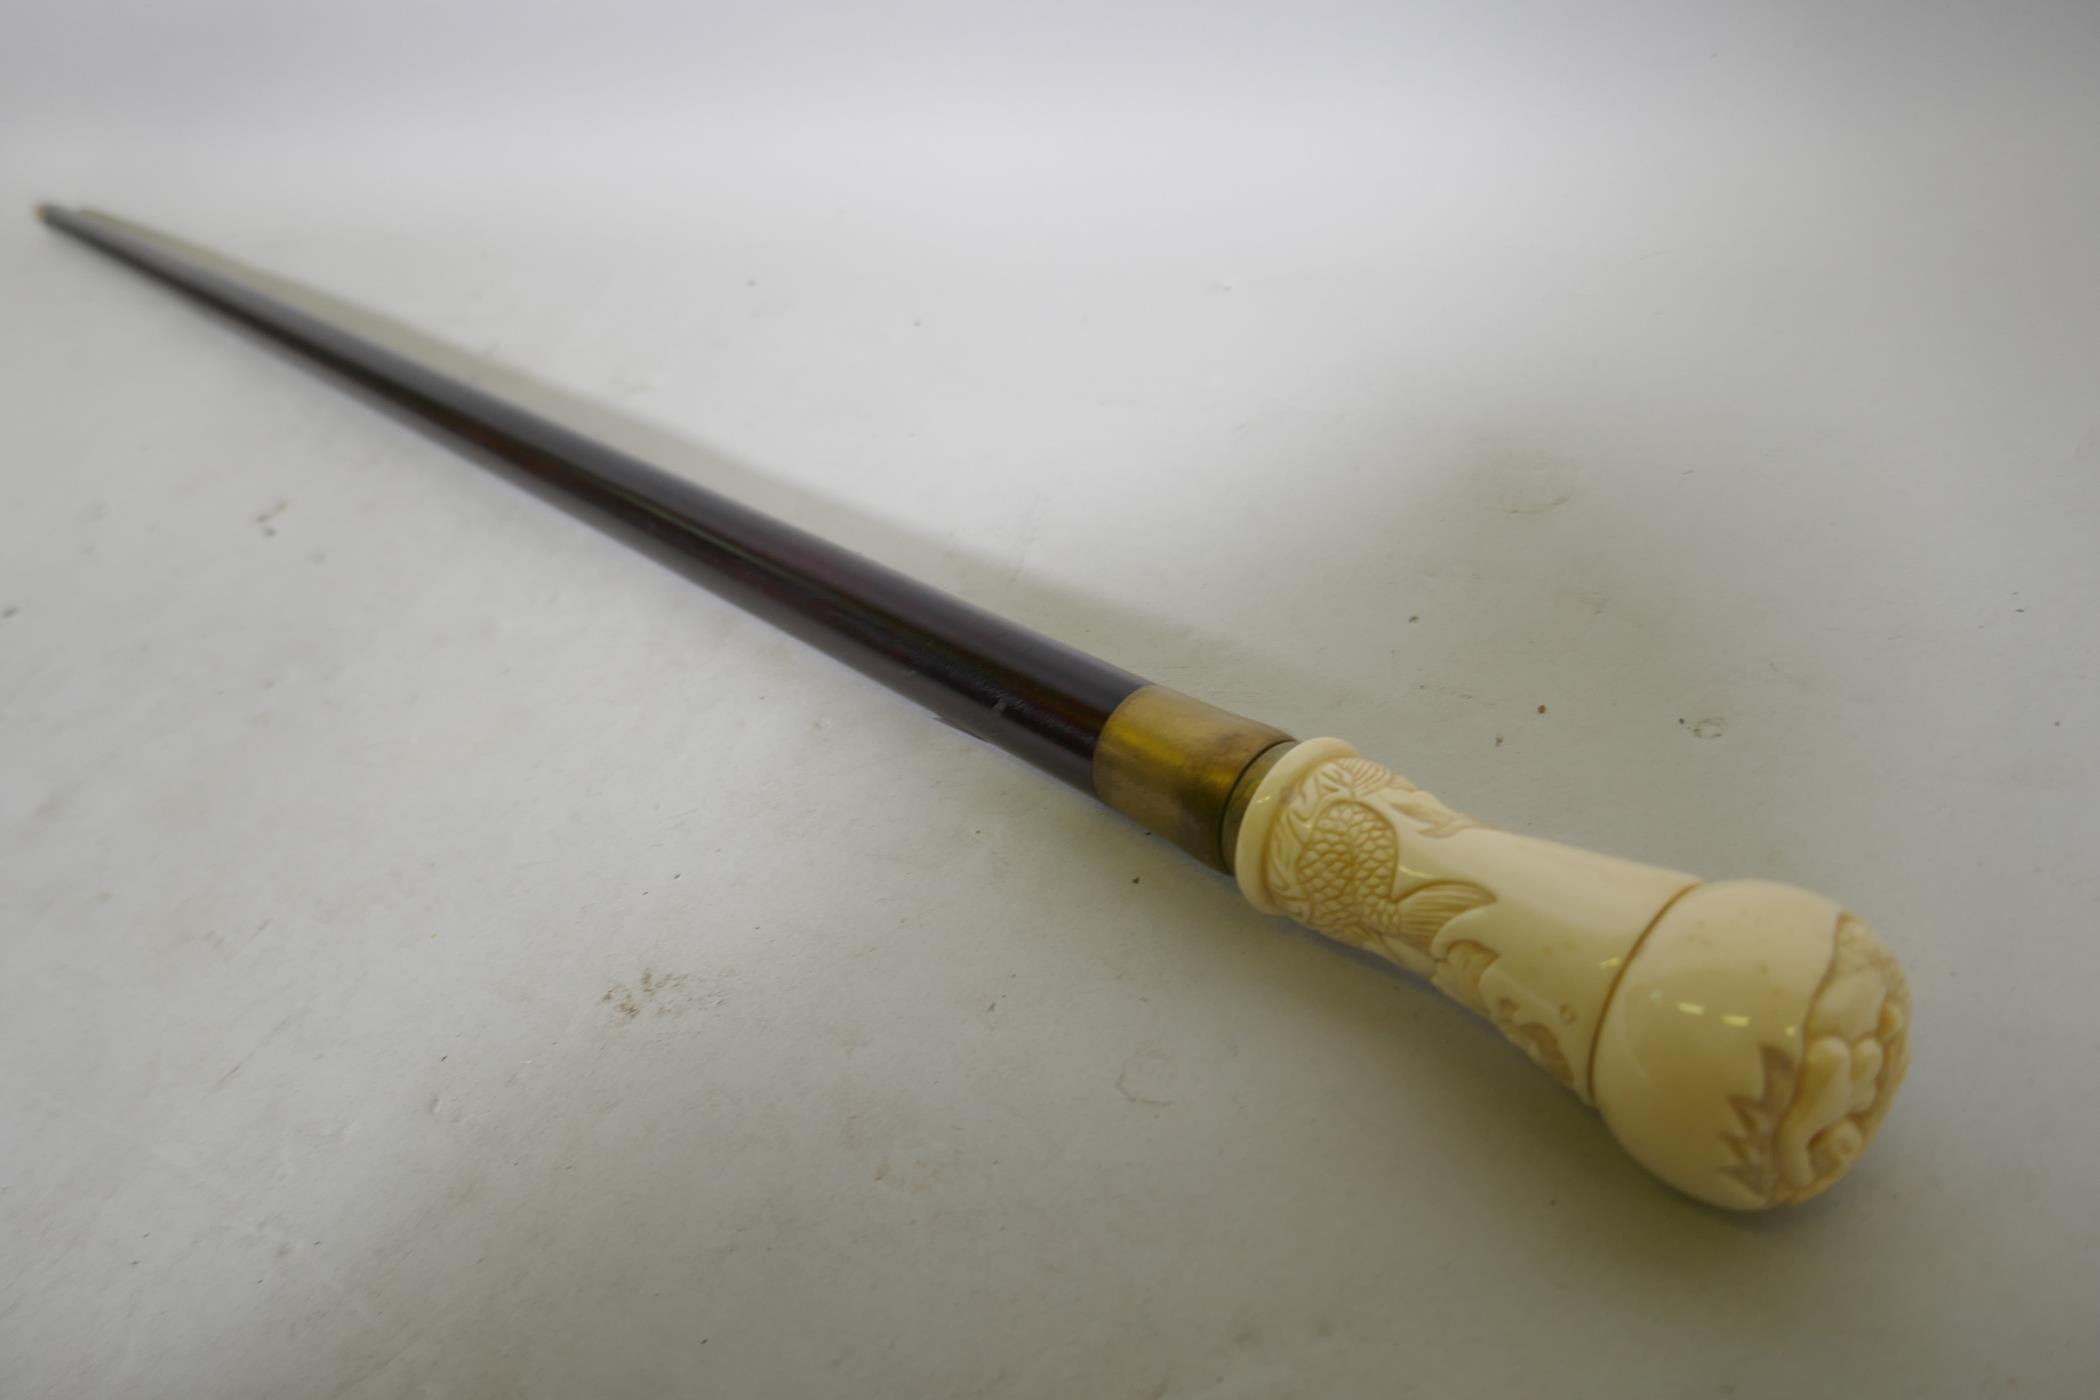 A hardwood walking cane with ivorine handle and mermaid decoration, 88cm long